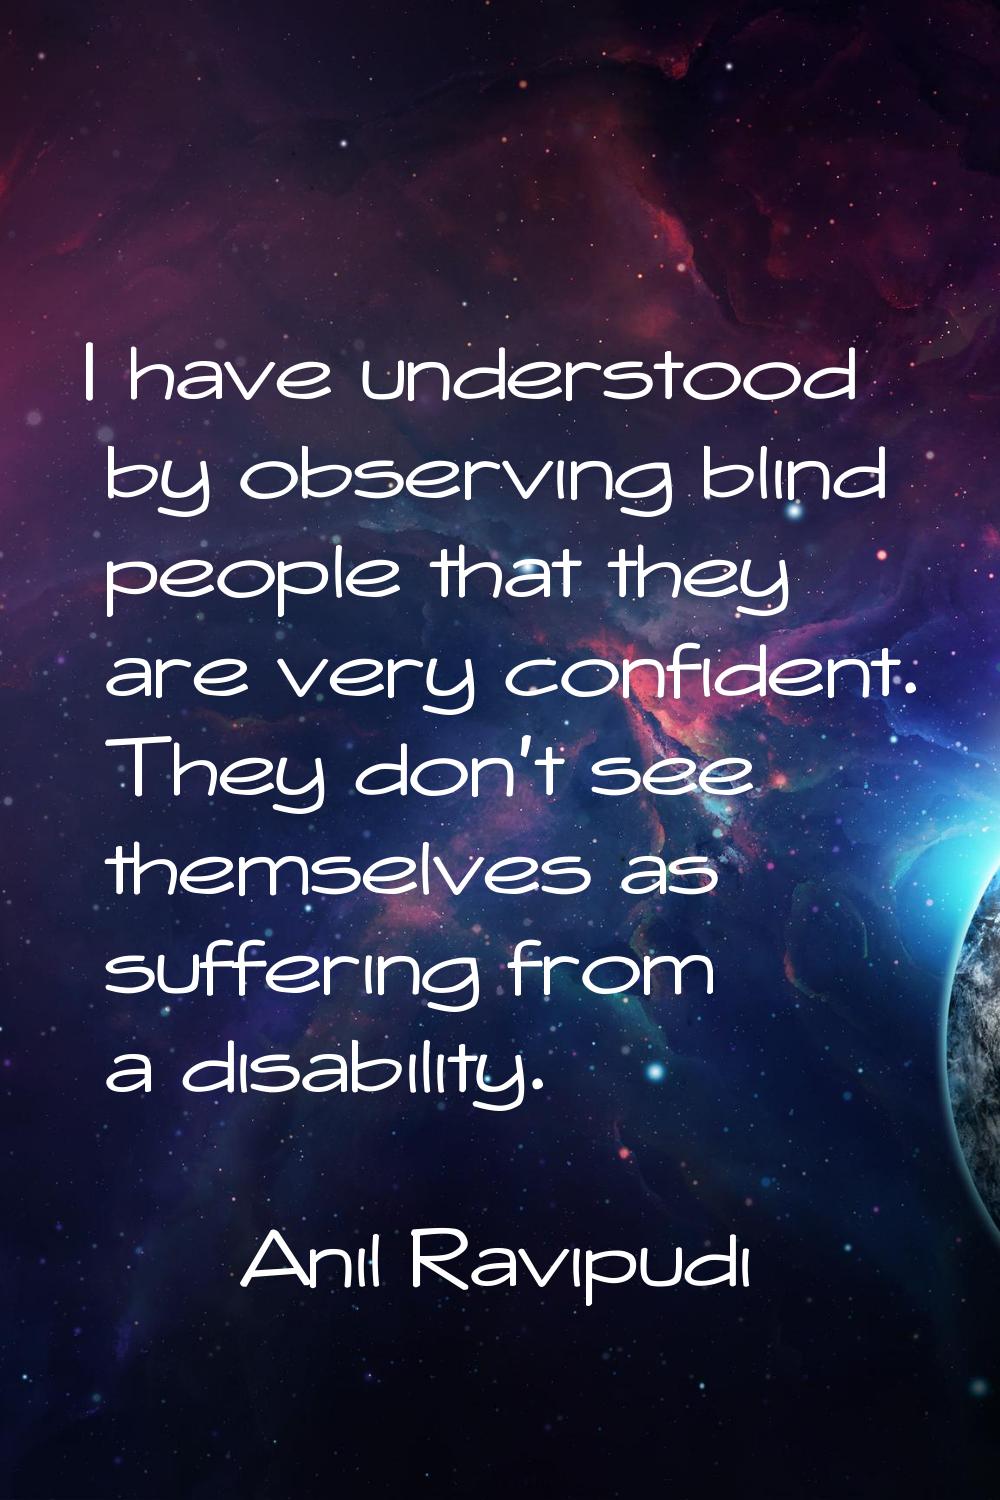 I have understood by observing blind people that they are very confident. They don't see themselves